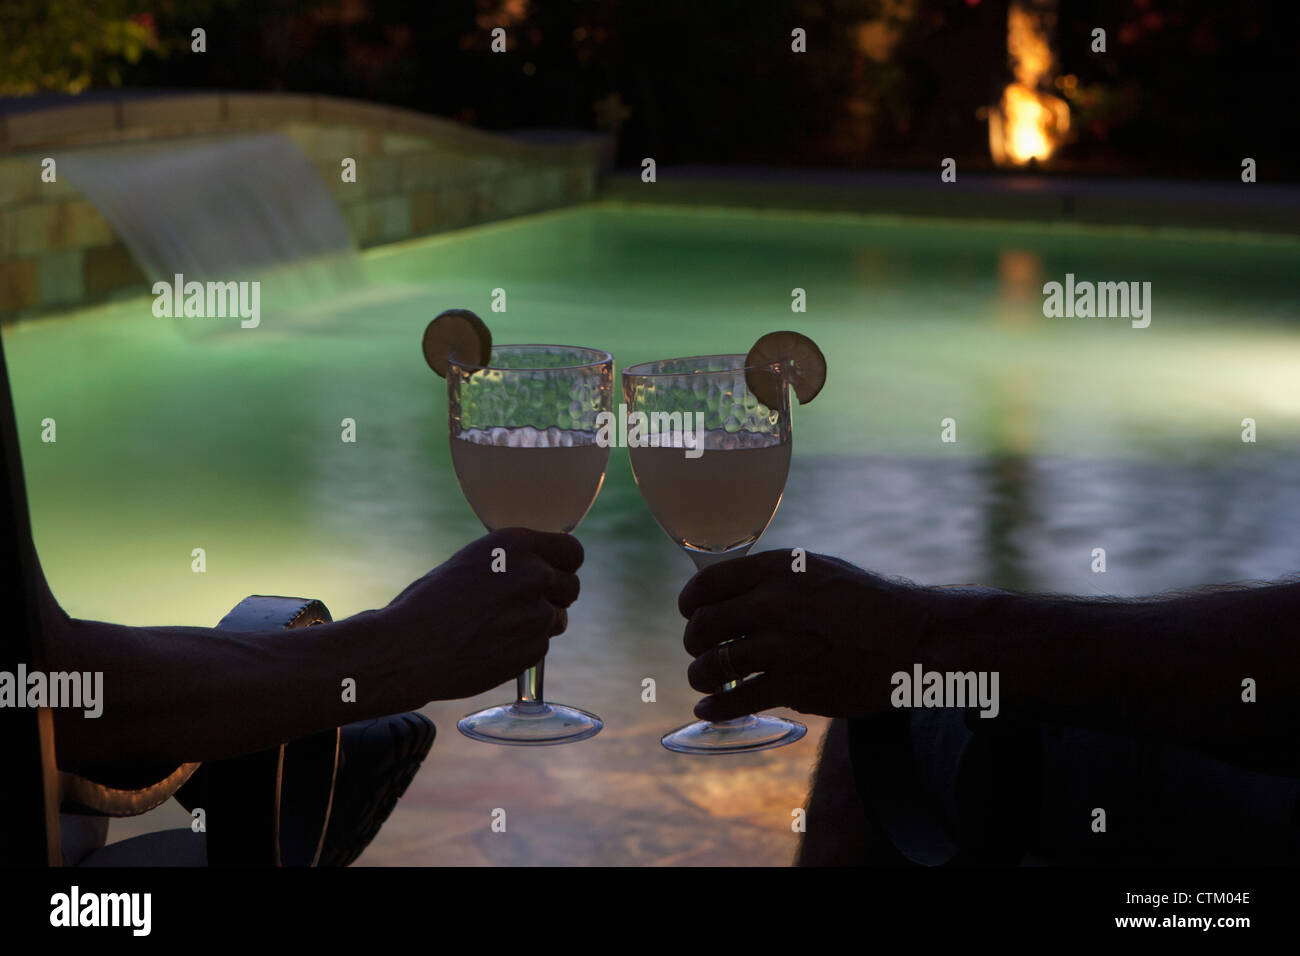 Couple Sitting At Pool Side At Night With Two Glasses Together With Lime Wedges And Pool Lights; Palm Springs, California, USA Stock Photo